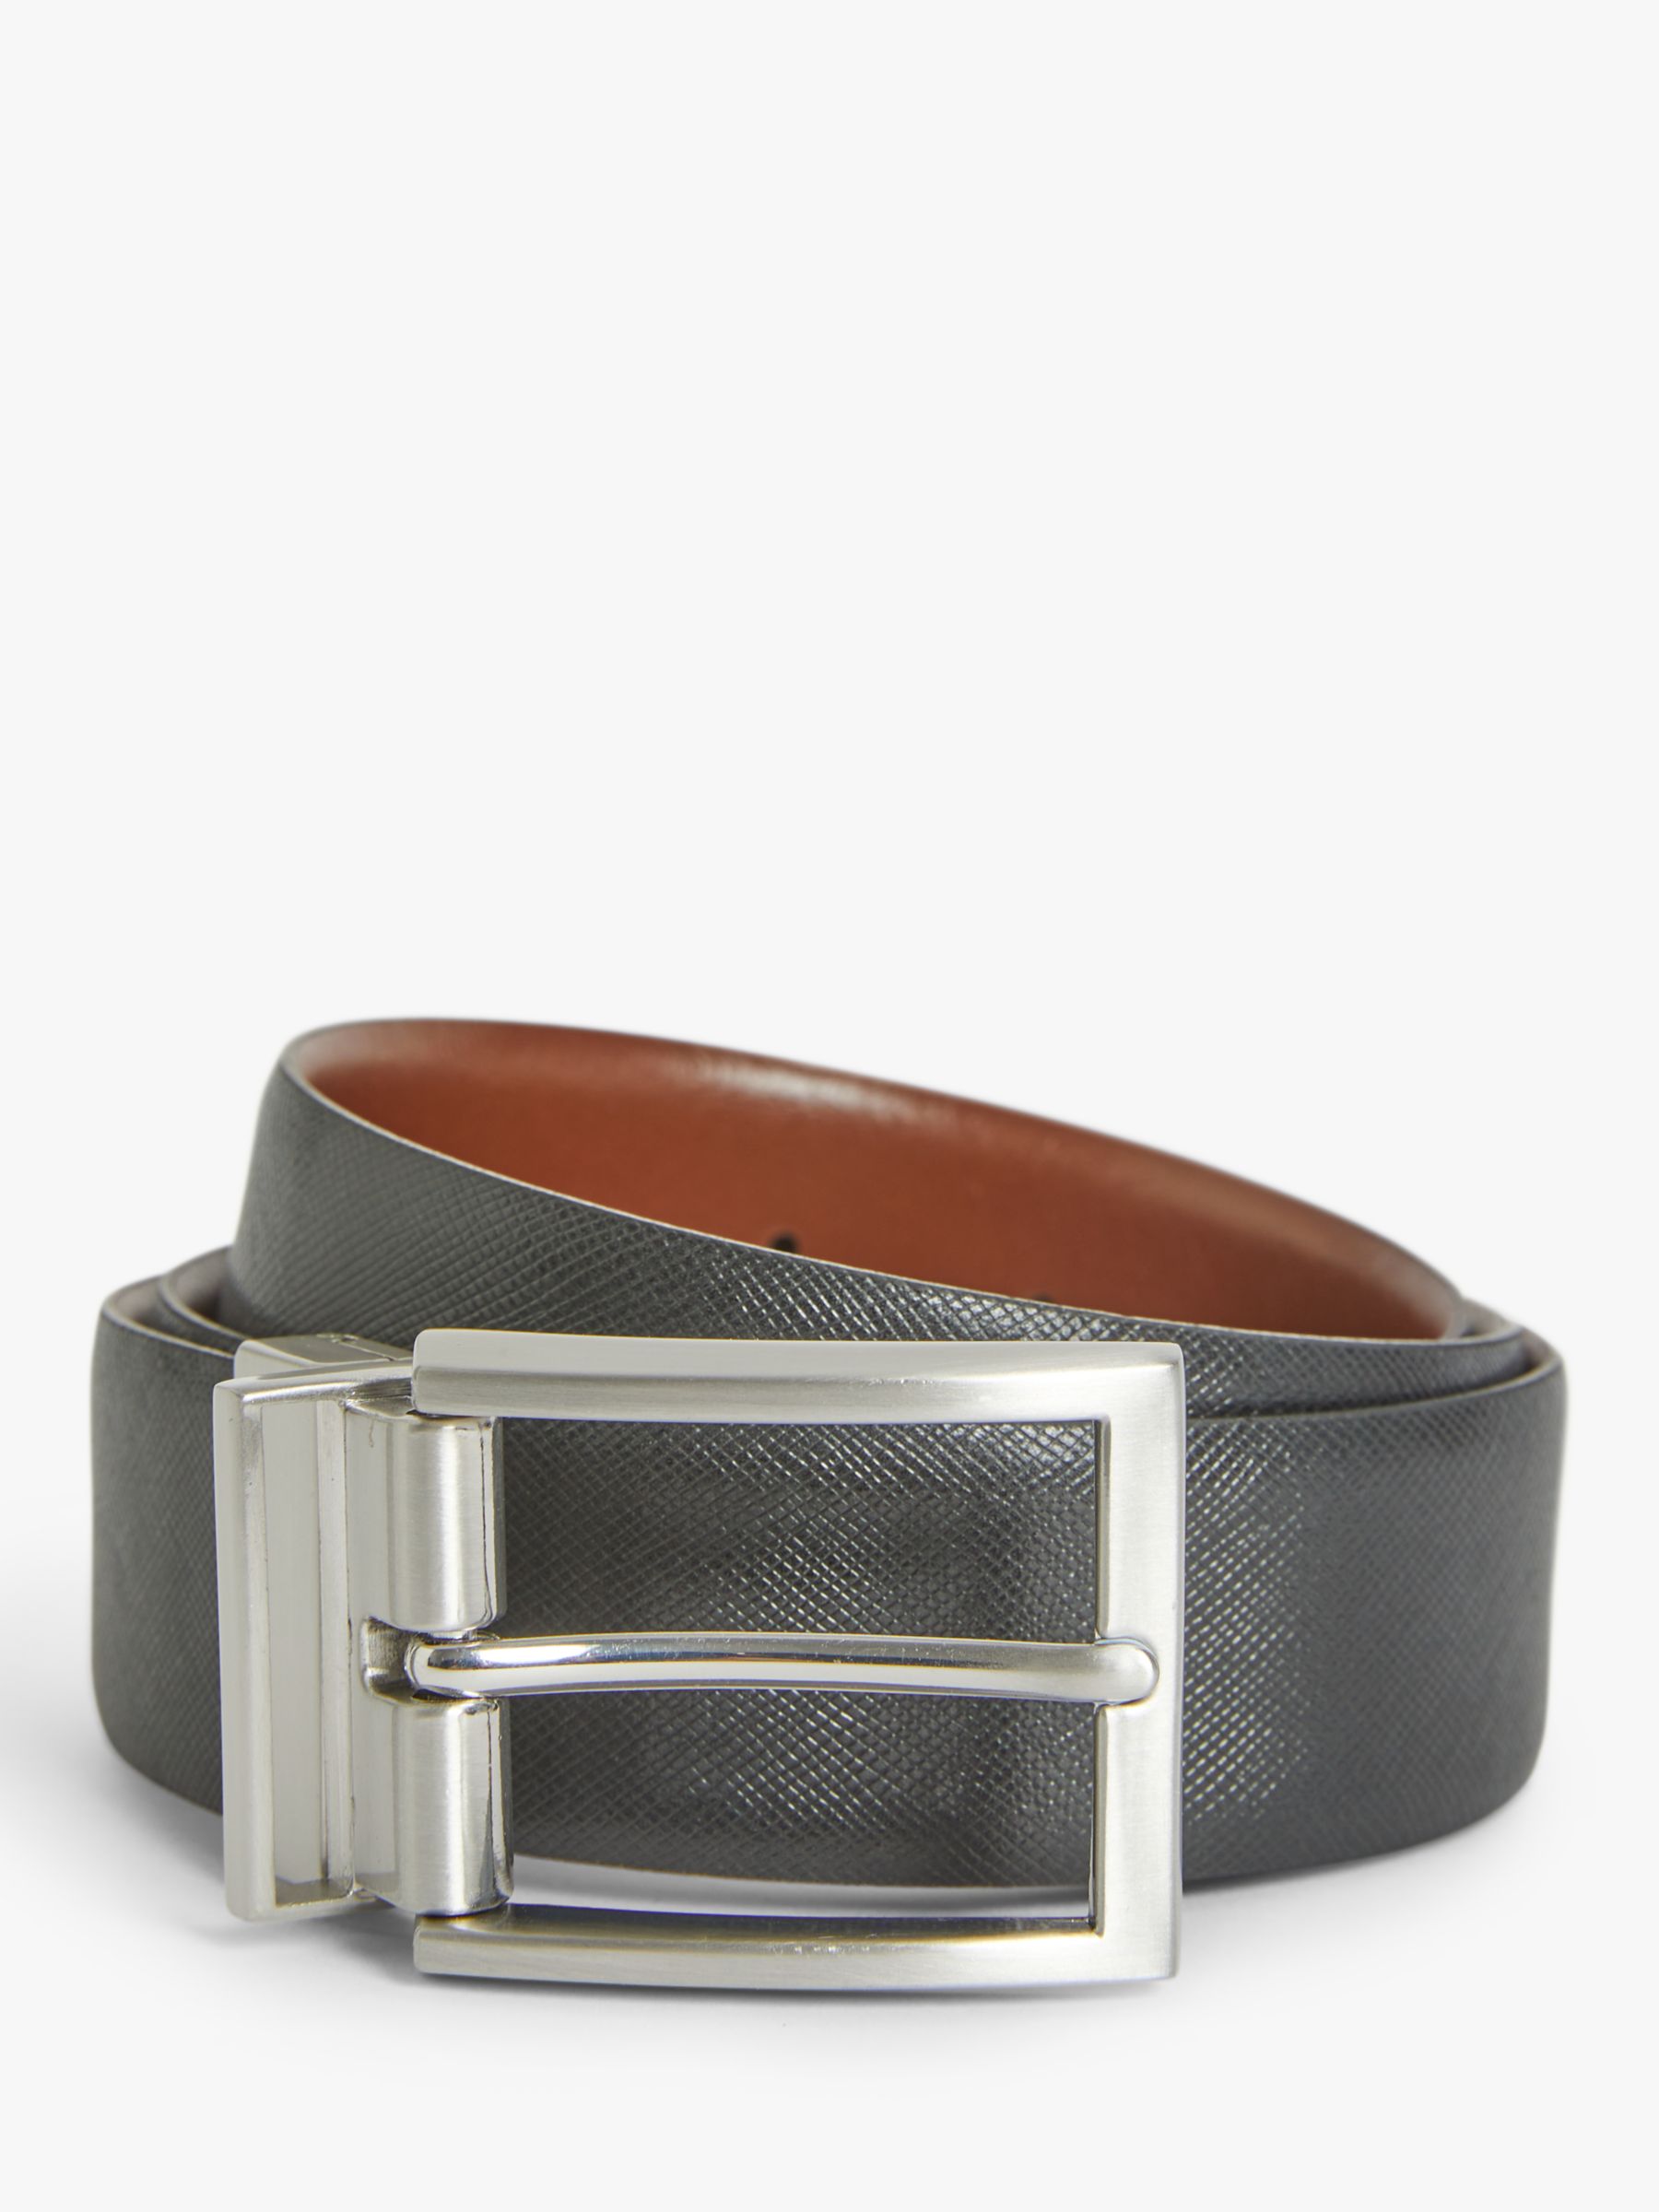 John Lewis Made in Italy Reversible Leather Jeans Belt at John Lewis ...